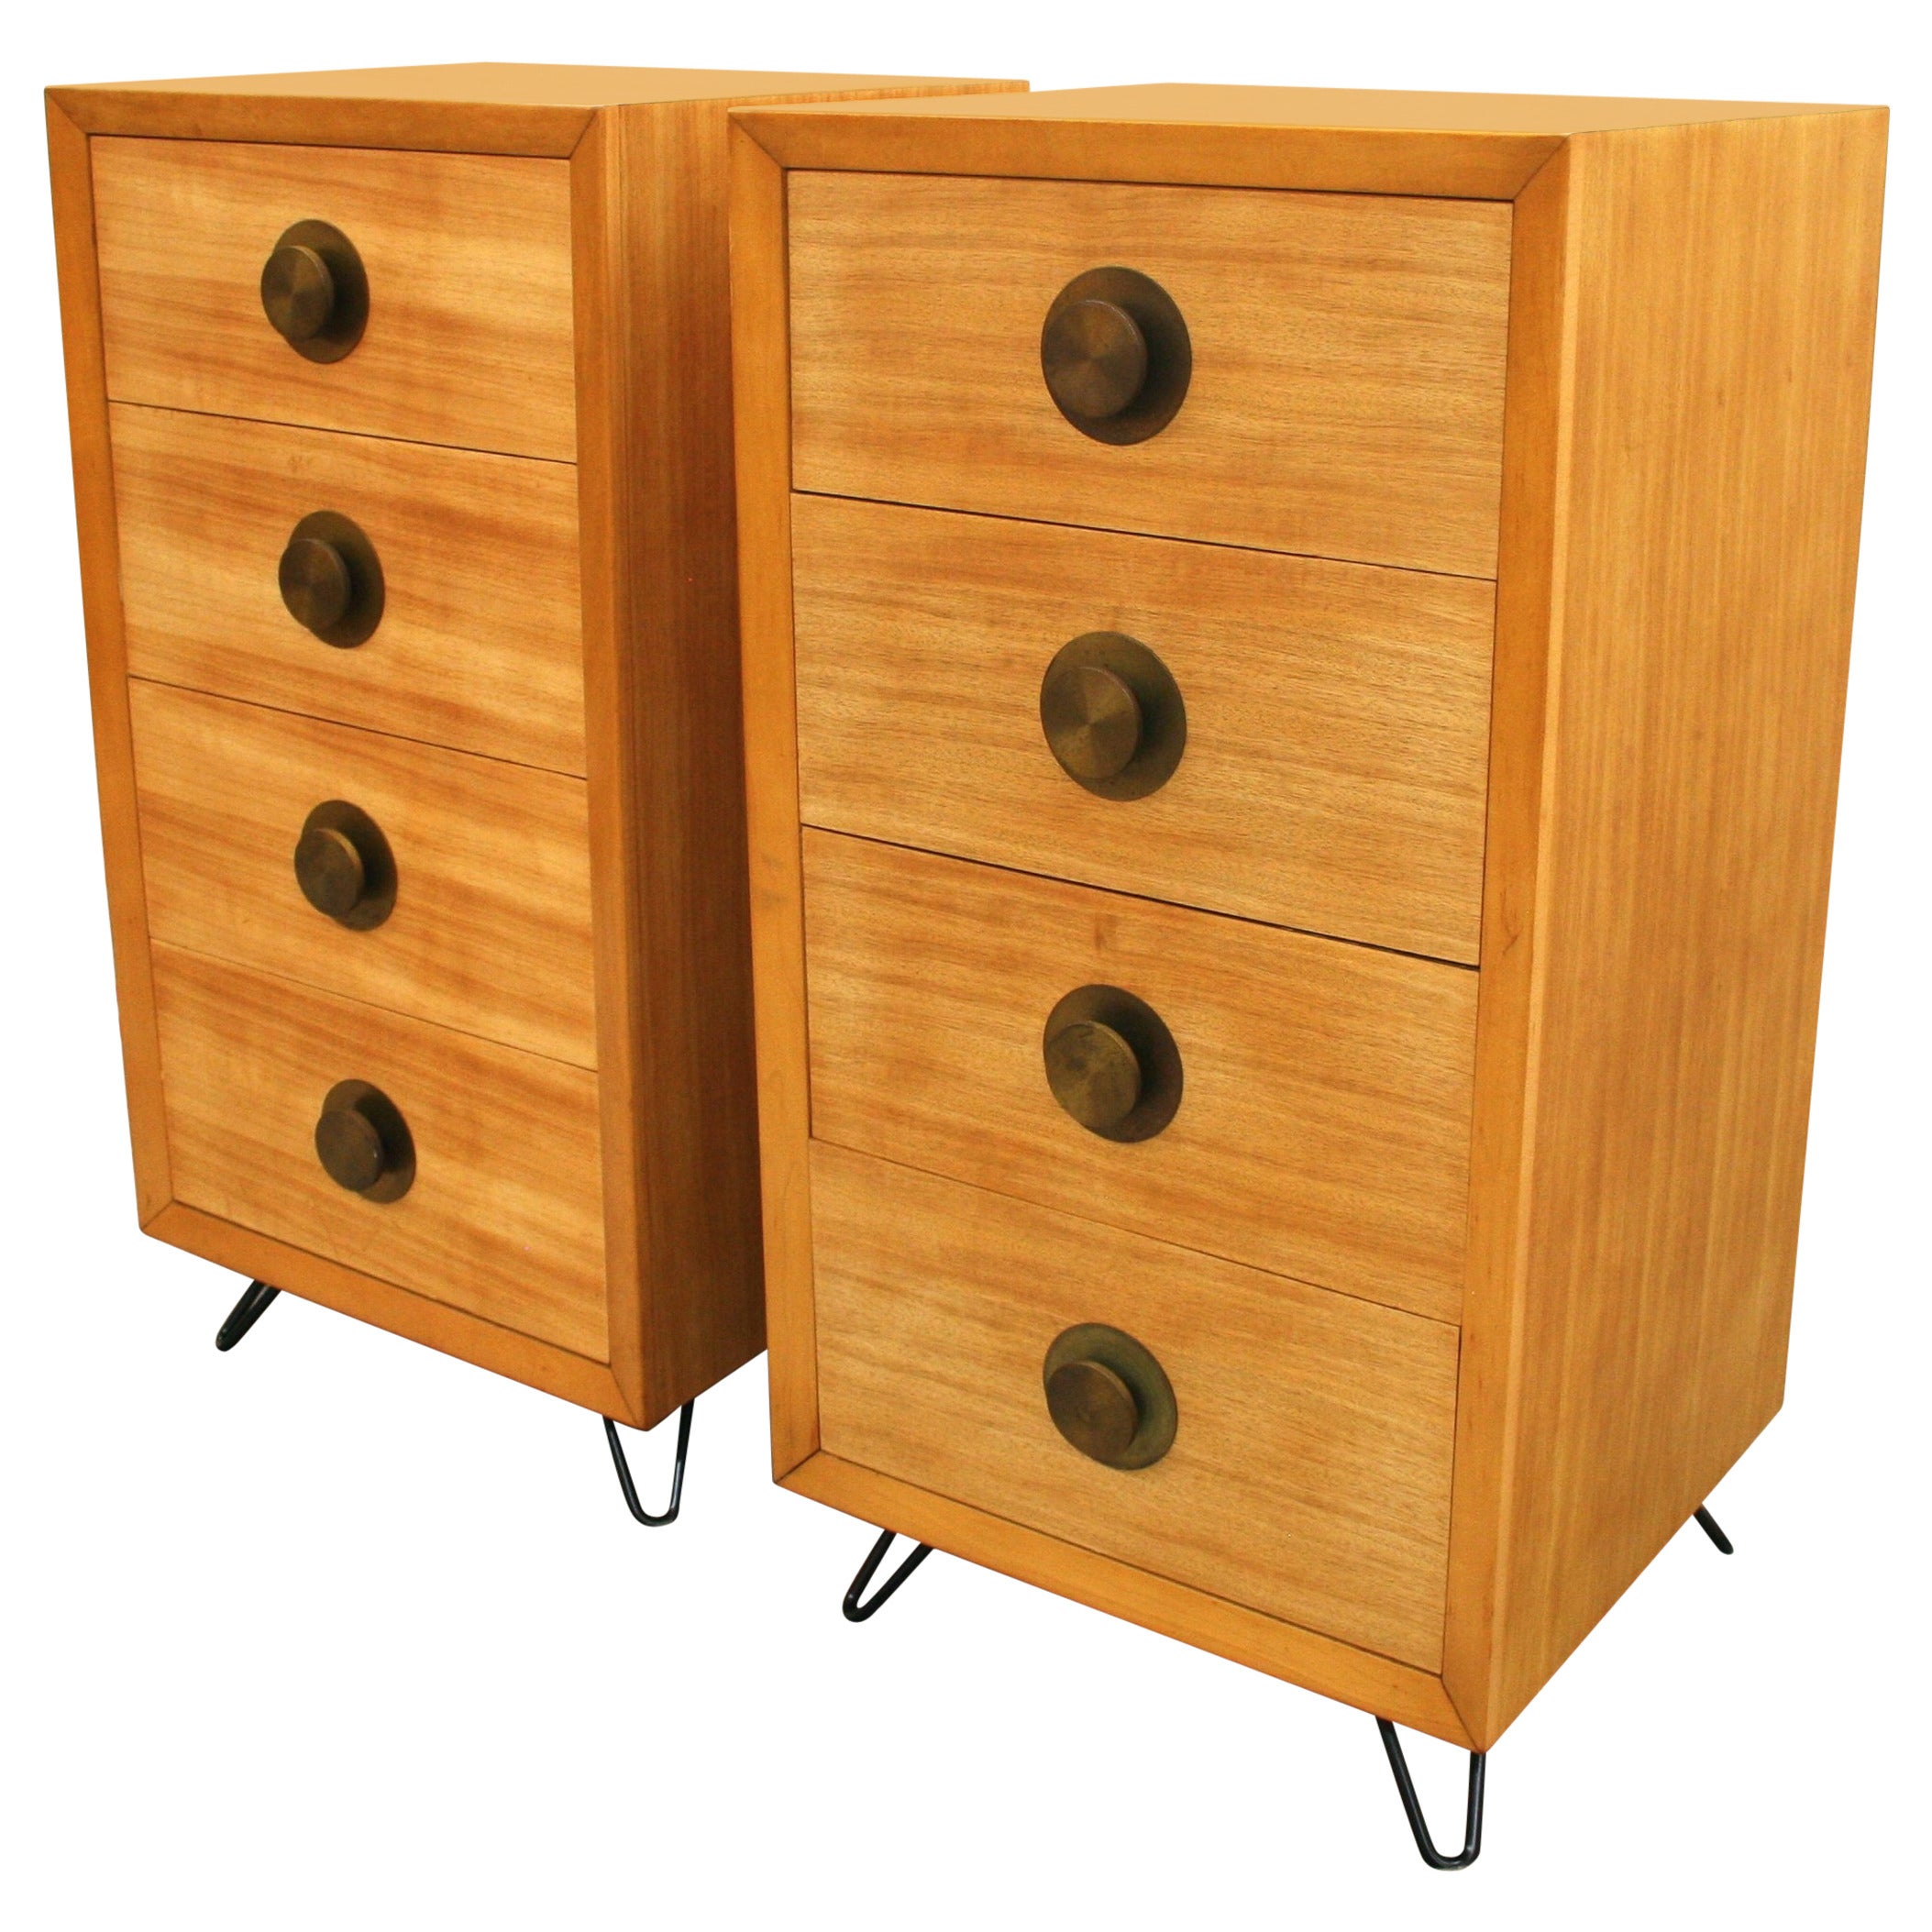 Pair Tall Chests or Nightstands with Brass Pulls and Hairpin Legs, c. 1950 For Sale